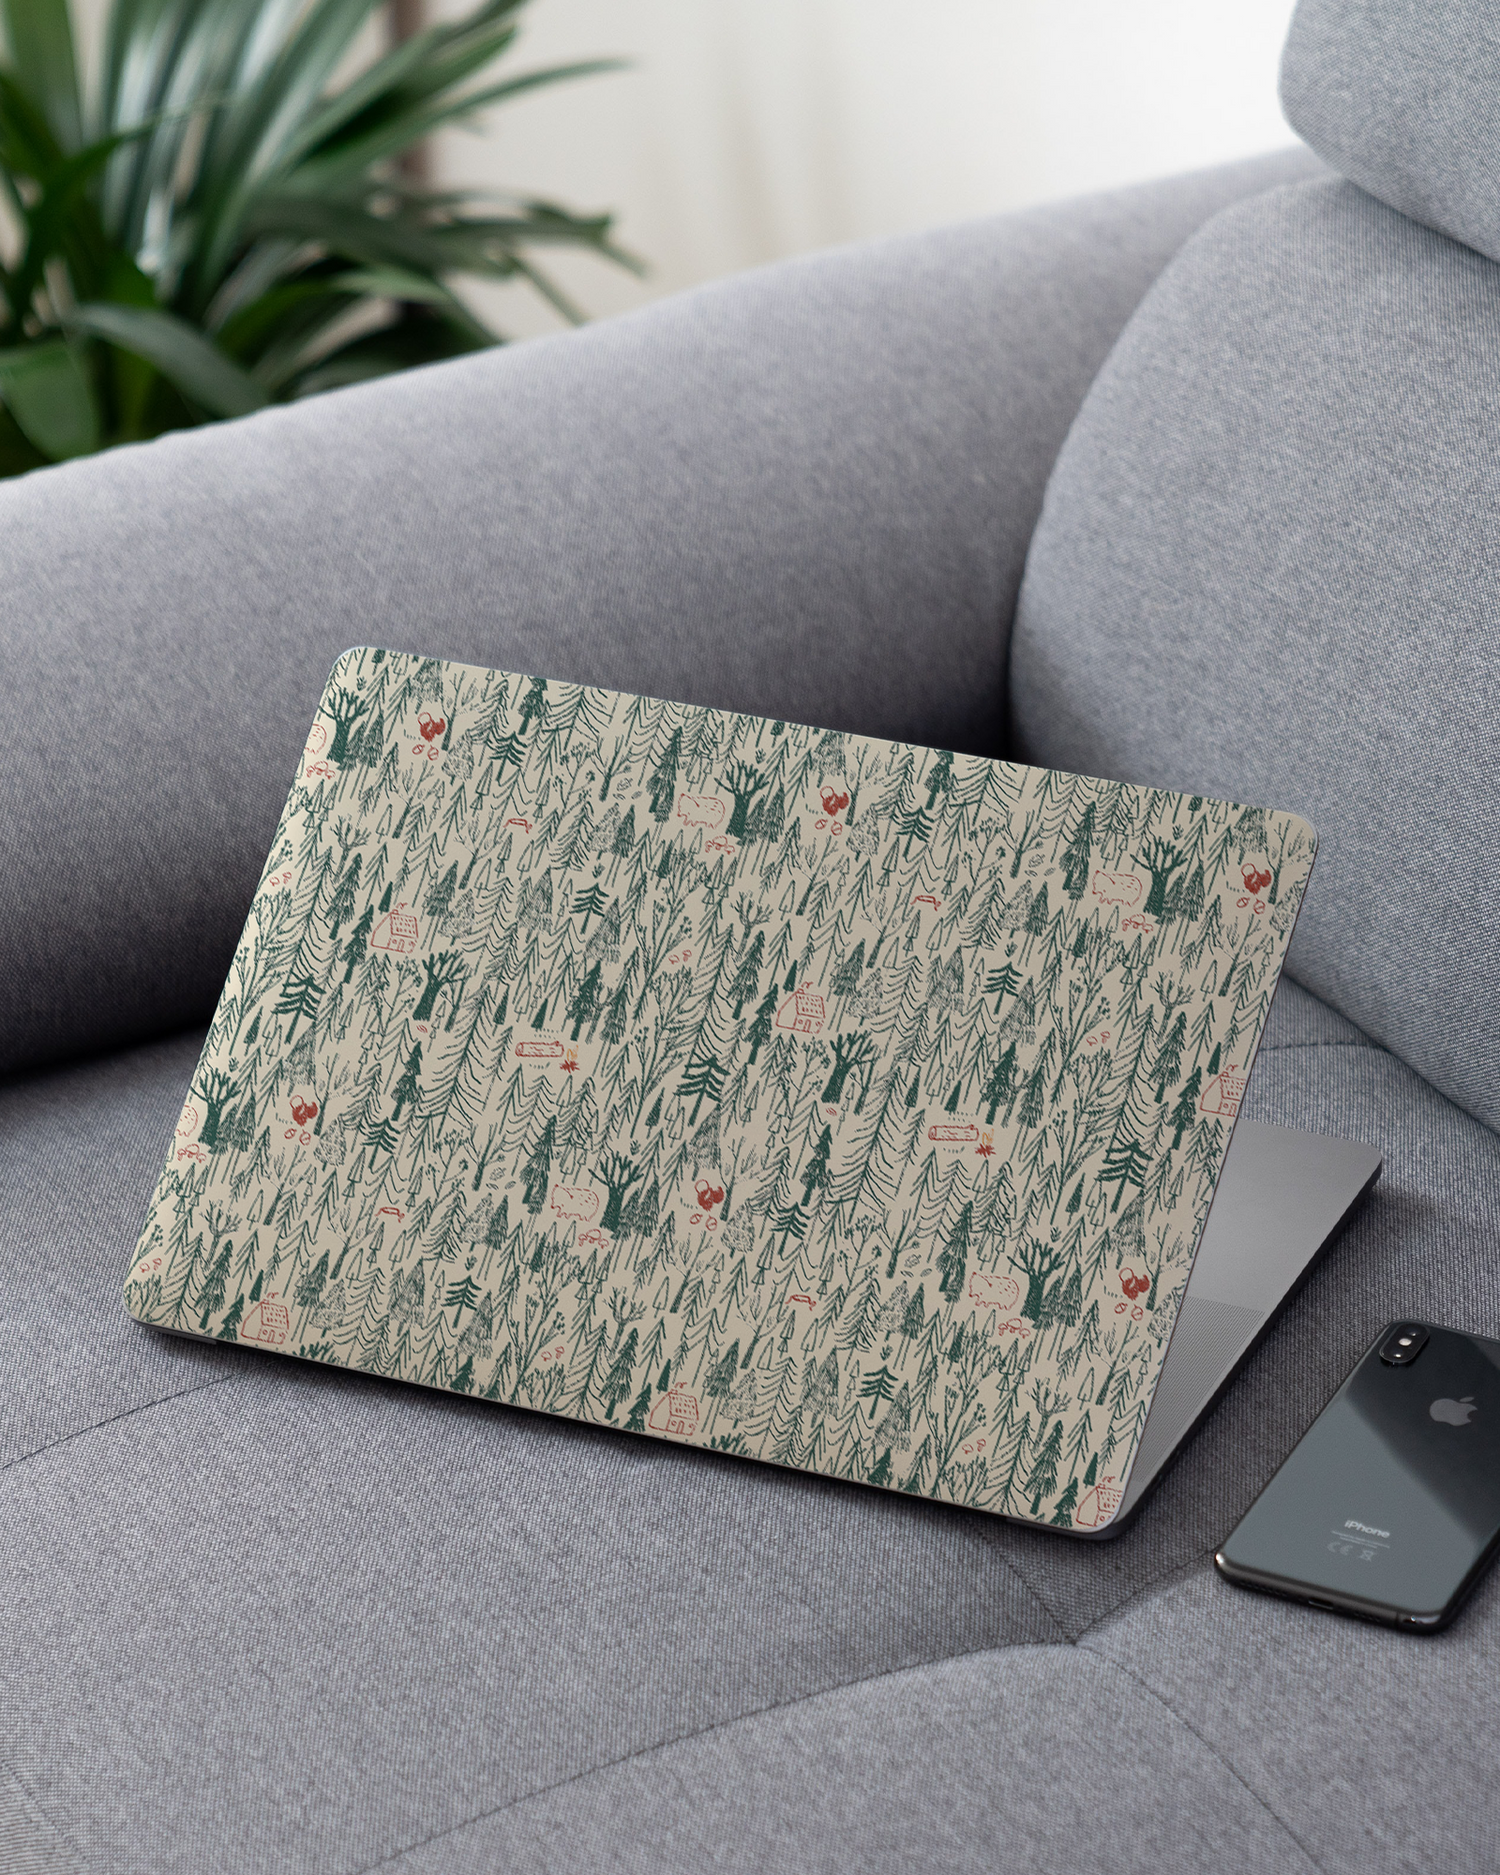 Wonder Forest Laptop Skin for 13 inch Apple MacBooks on a couch